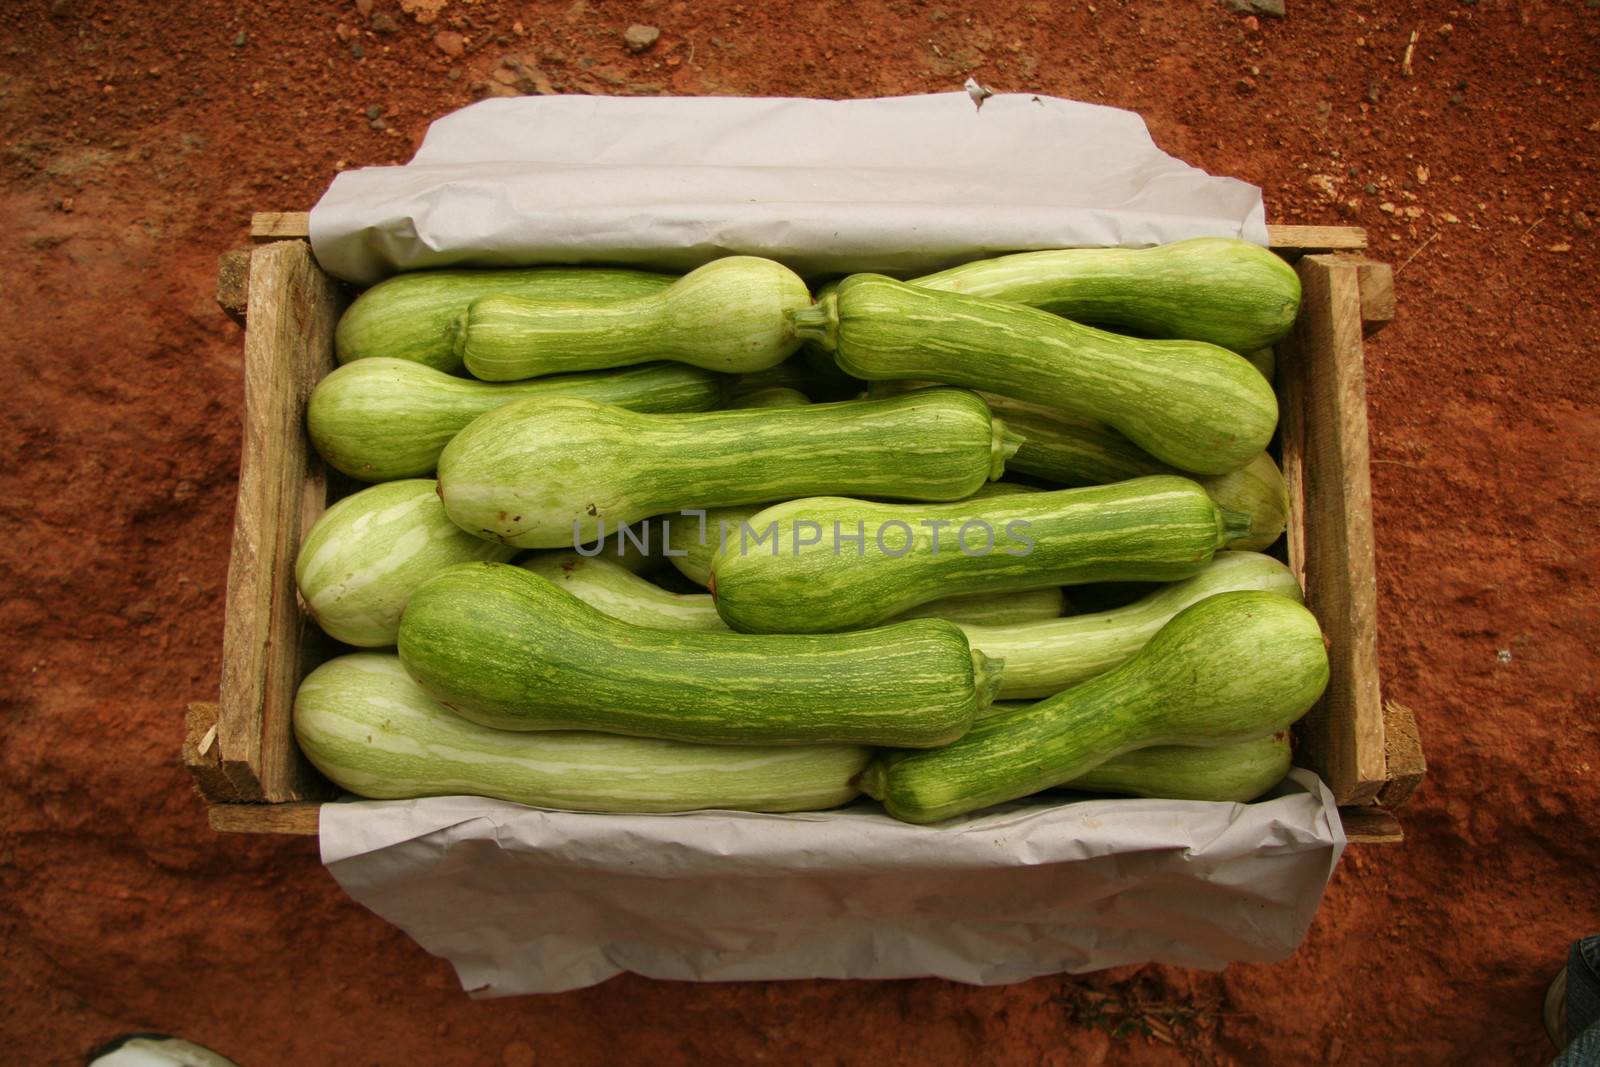 A box filled with summer squashes.